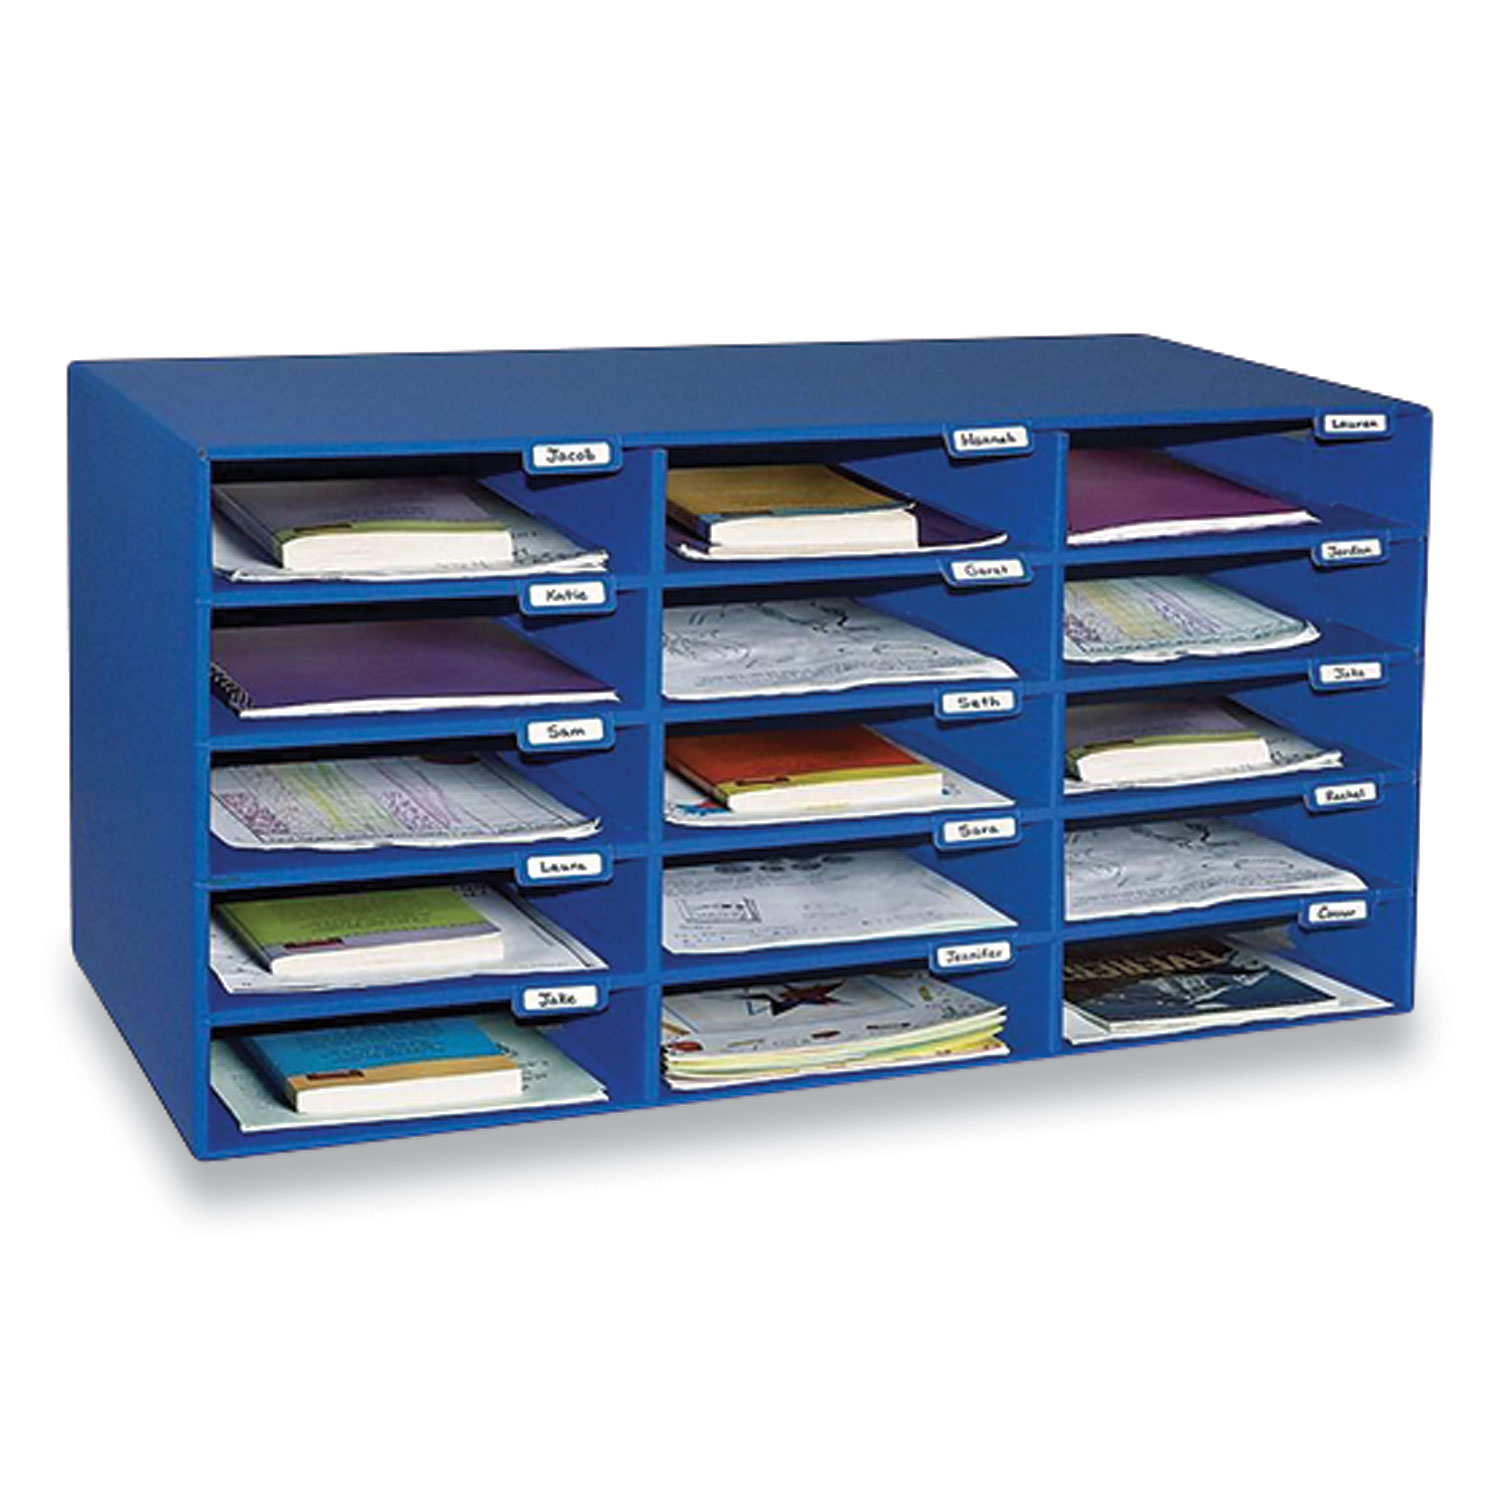  Pacon 001308 Classroom Keepers Corrugated Mailbox, 31.5 x 12.88 x 16.38, Blue (PAC637443) 